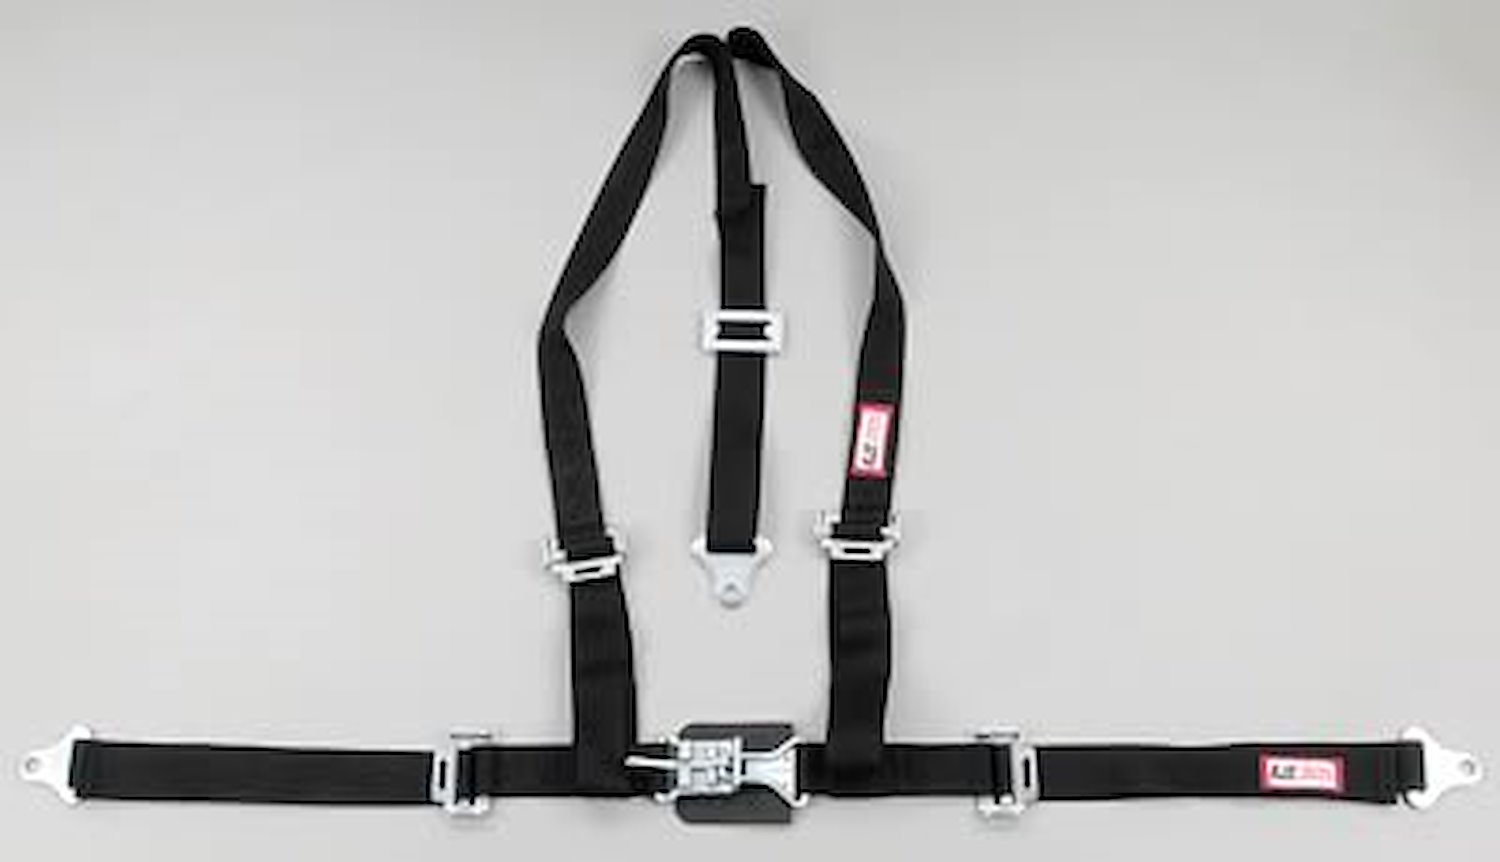 NON-SFI L&L HARNESS 3 PULL DOWN Lap Belt w/adjuster 2 S.H. Y FLOOR Mount ALL WRAP ENDS BLUE